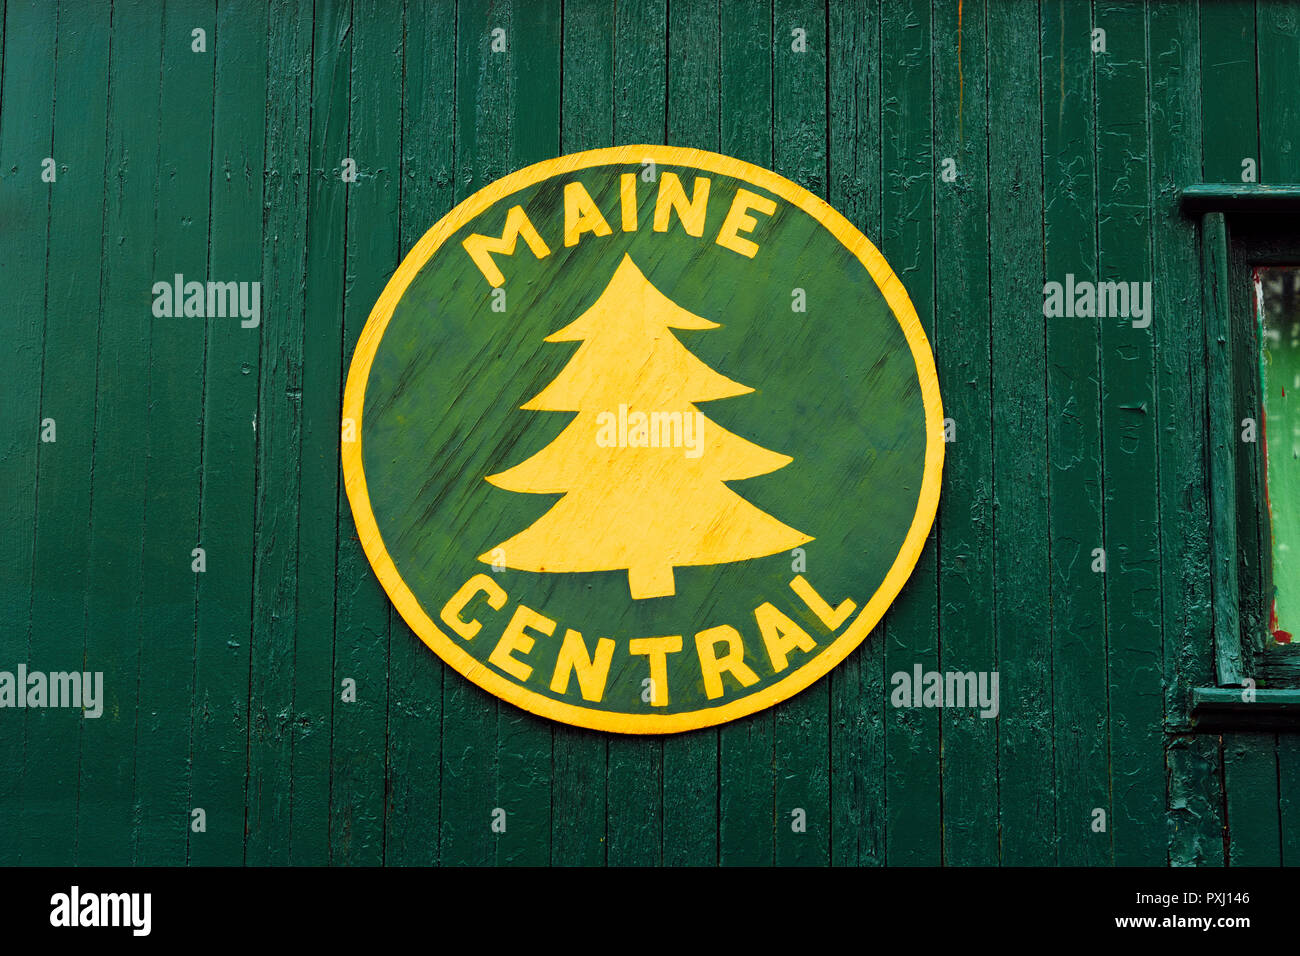 Maine central logo on a flanger displayed at the Conway Scenic Railroad in North Conway, New Hampshire. Stock Photo